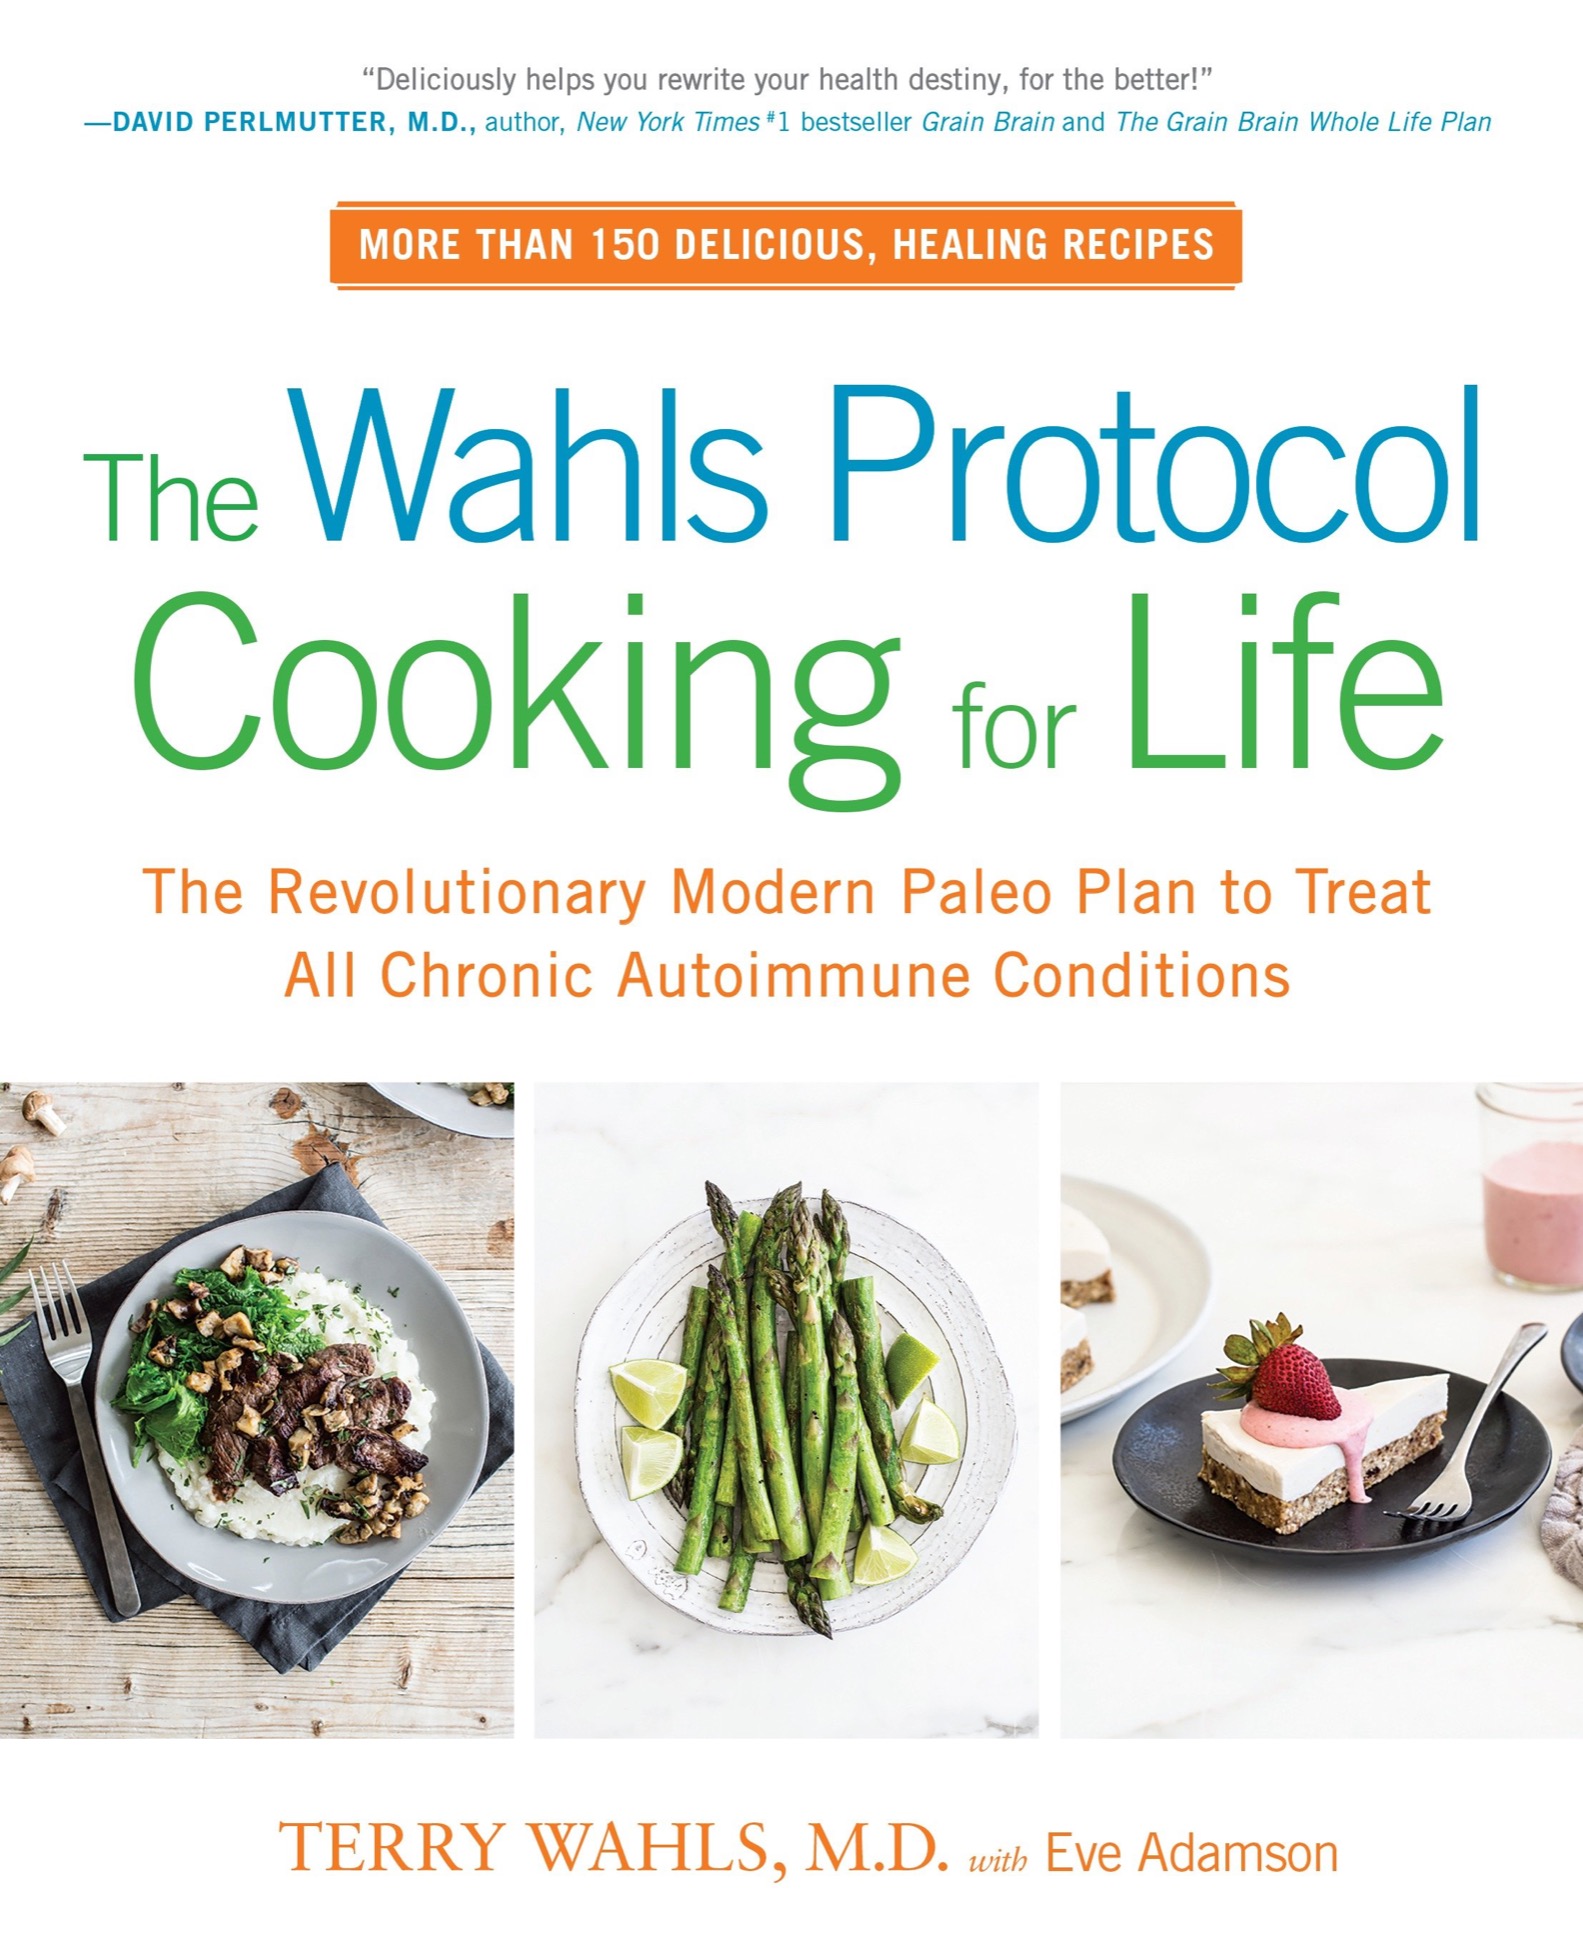 The Wahls protocol cooking for life - image 1